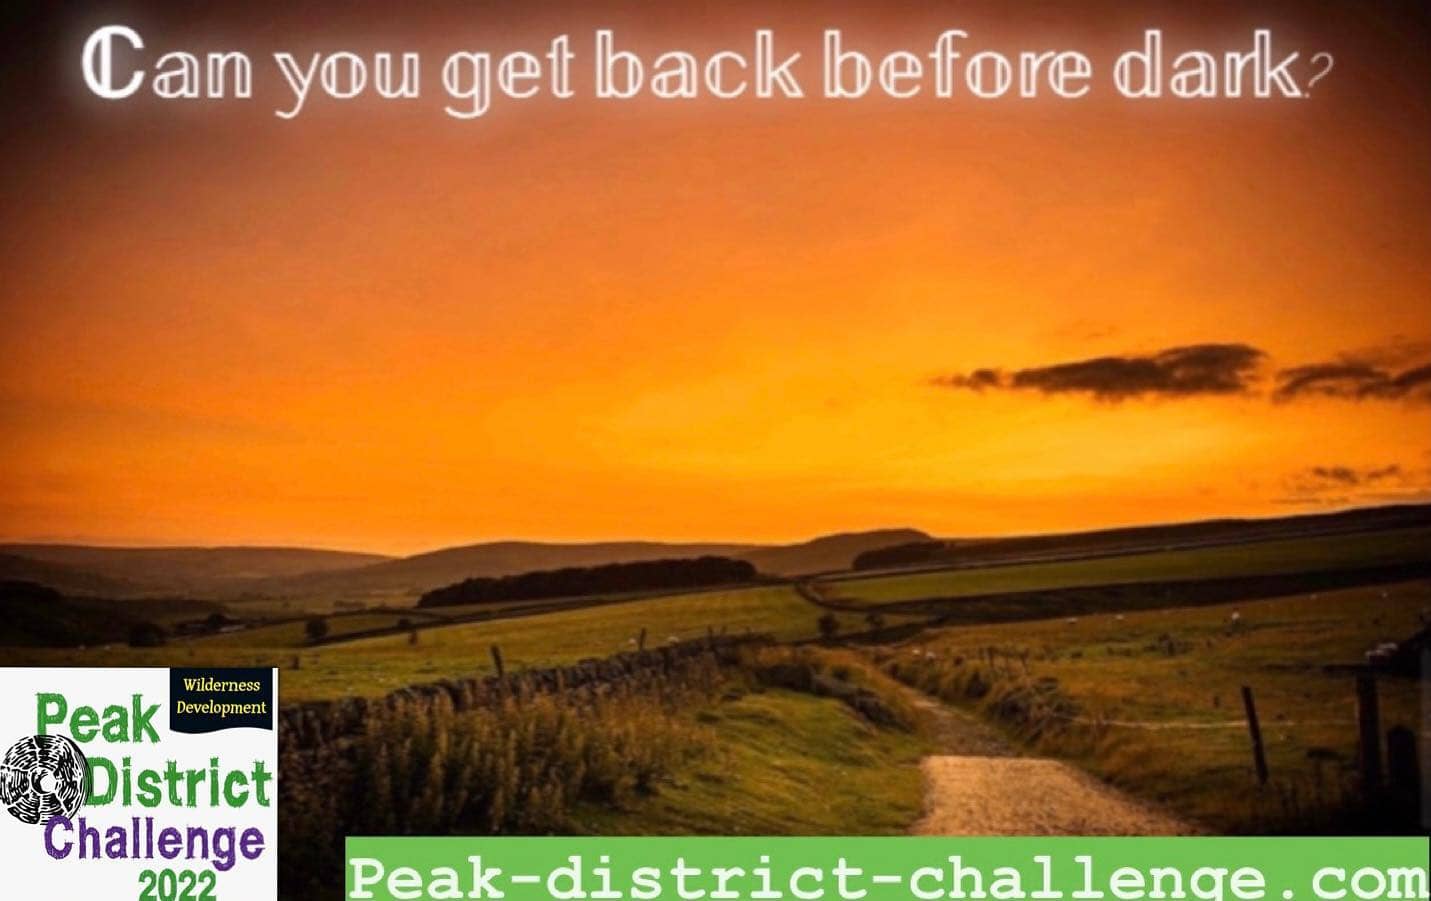 Welcome aboard to Polly, our first Back Before Dark 10km fell race entrant for 2022. We look forw...